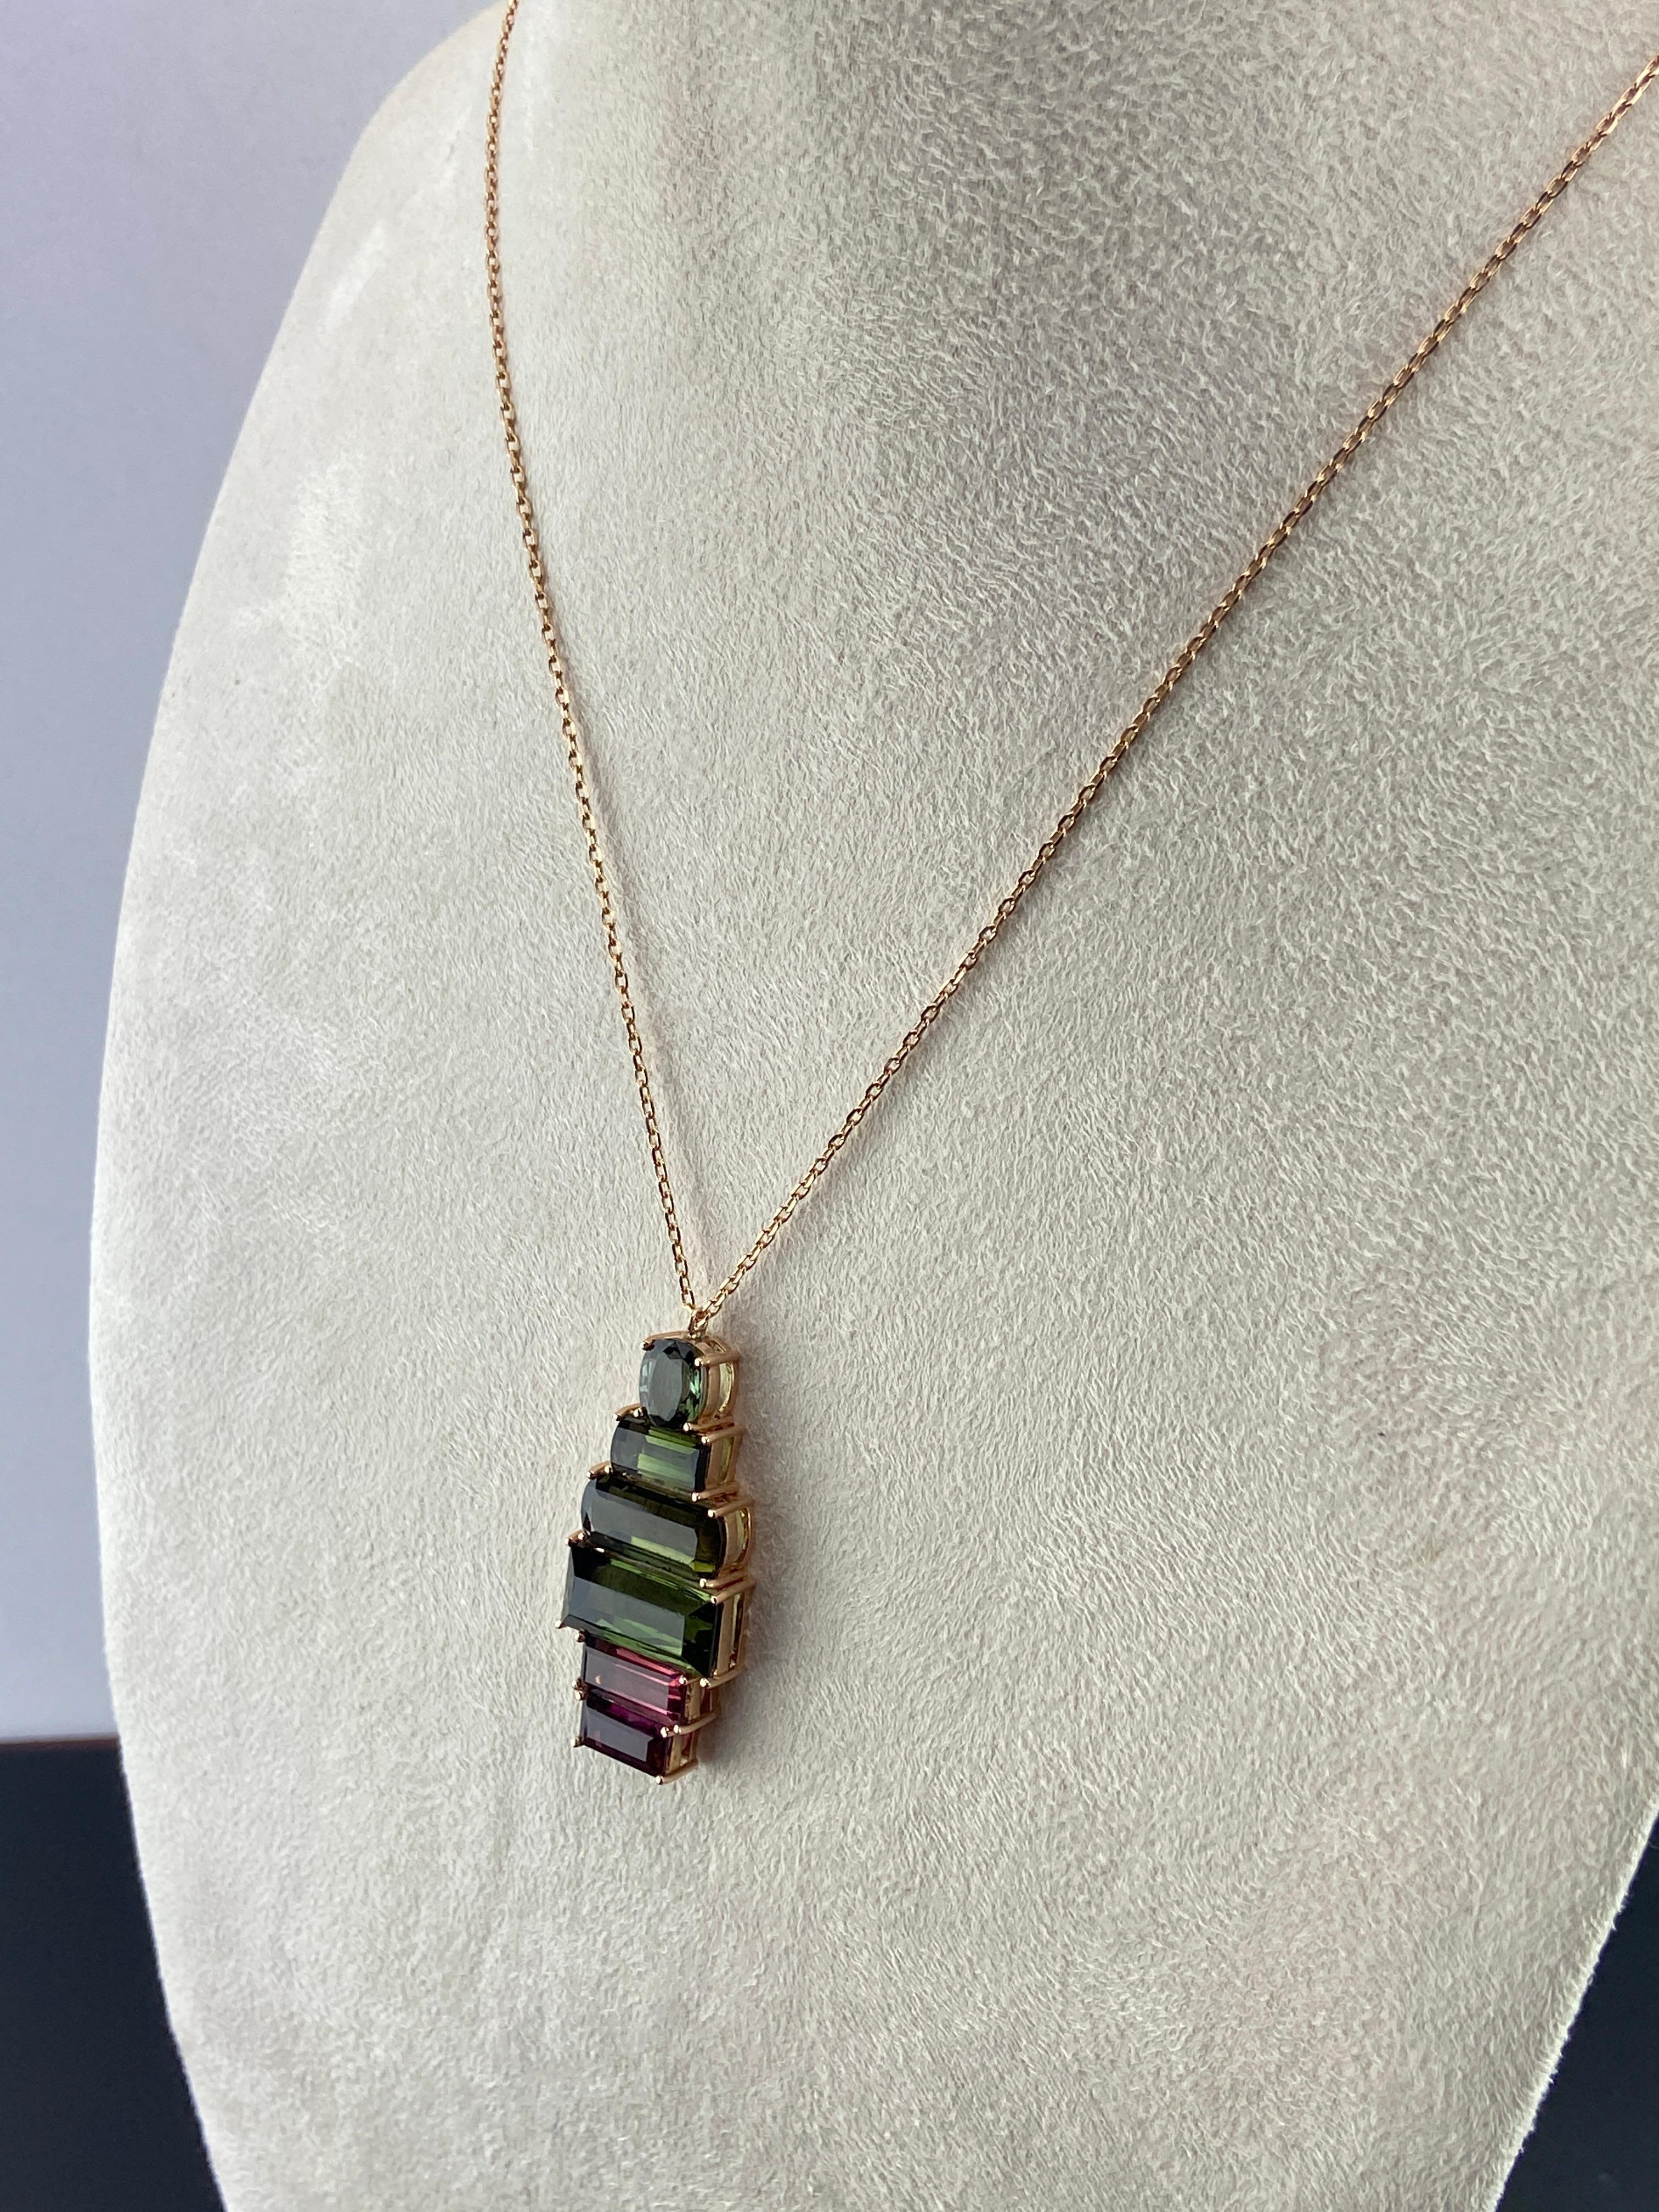 24.93 Carat Tourmaline and 18K Rose Gold Pendant Necklace In New Condition For Sale In Bangkok, Thailand